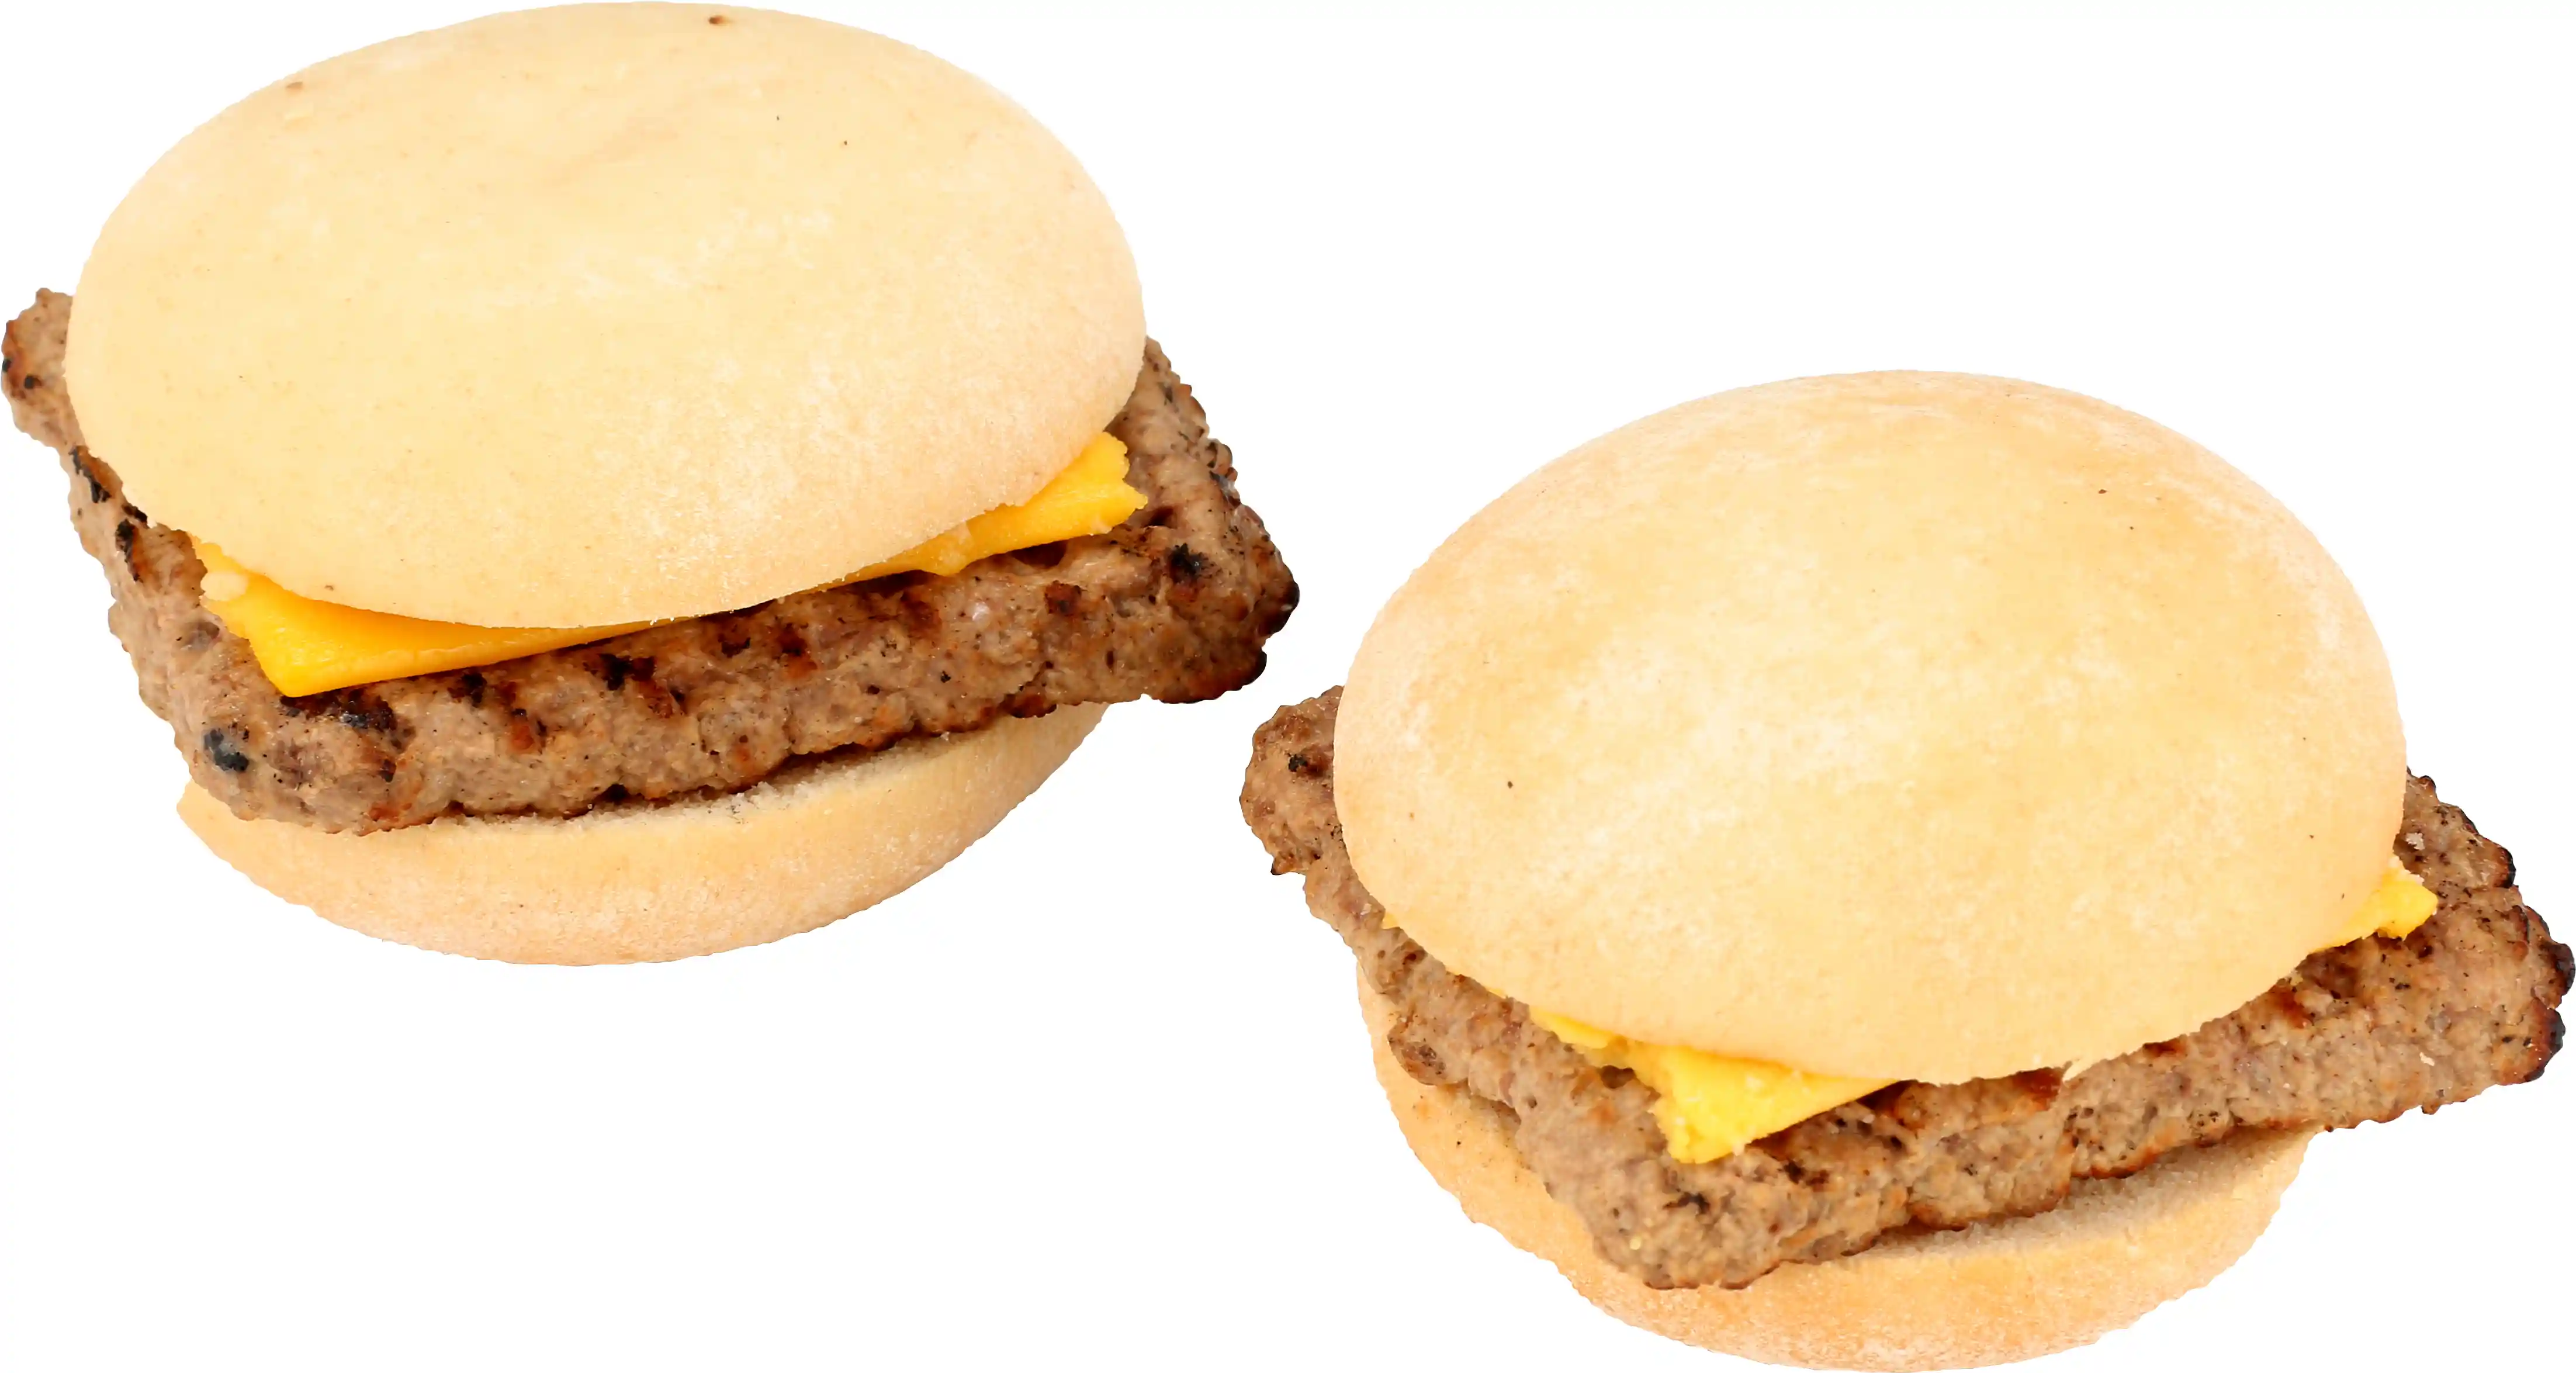 AdvancePierre™ Fully Cooked Mini Twin Flamebroiled Beef Pattie with Onion & American Cheese on a Whole Grain Bun, 4.71ozhttps://images.salsify.com/image/upload/s--yl3F1s-h--/q_25/yh52b6a2772wfkwvzojx.webp